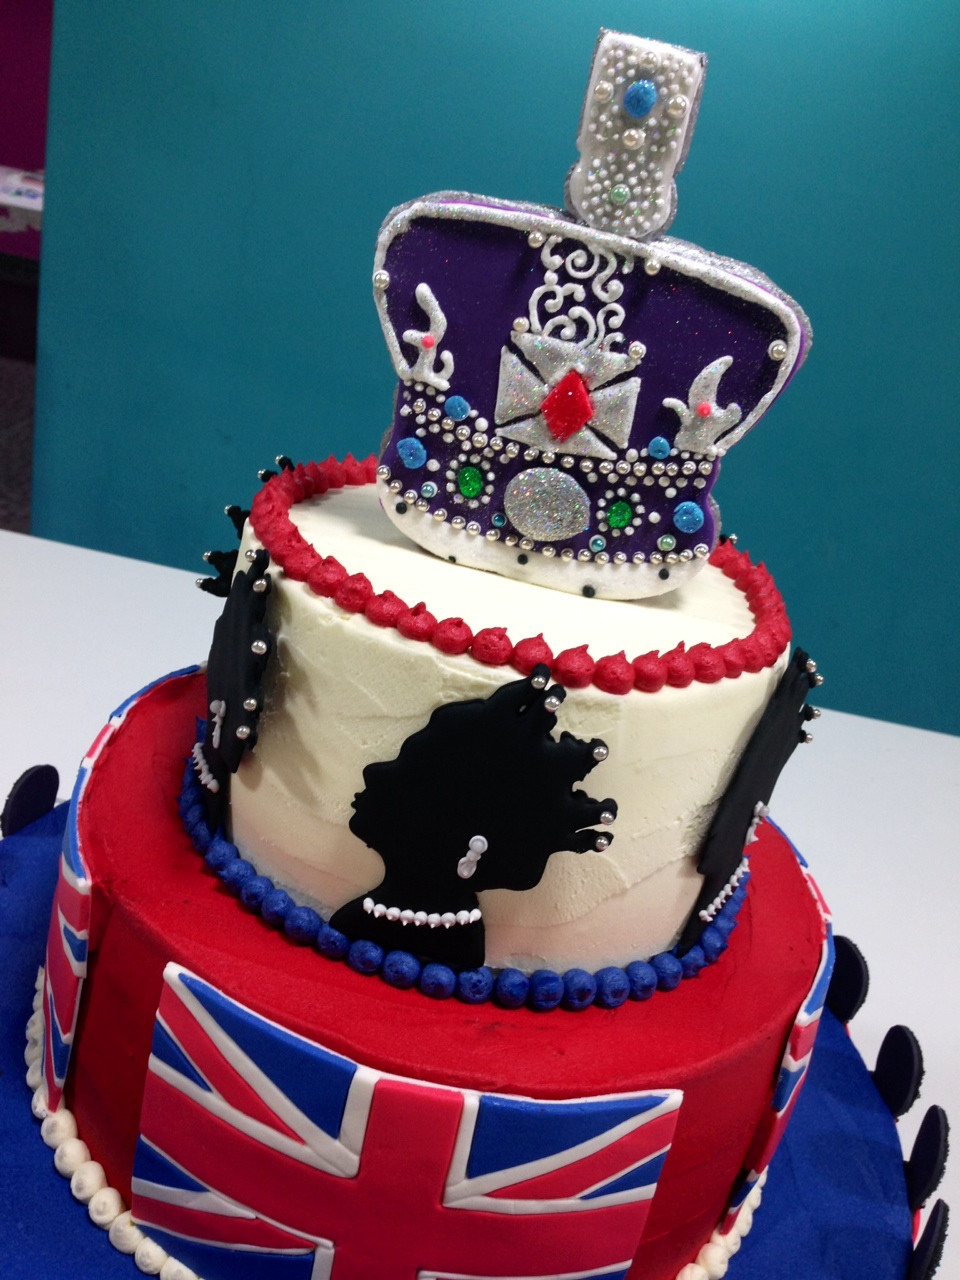 Queen Birthday Cake
 Cocoa and Co s Queen Elizabeth s Birthday Cake A Cake Fit